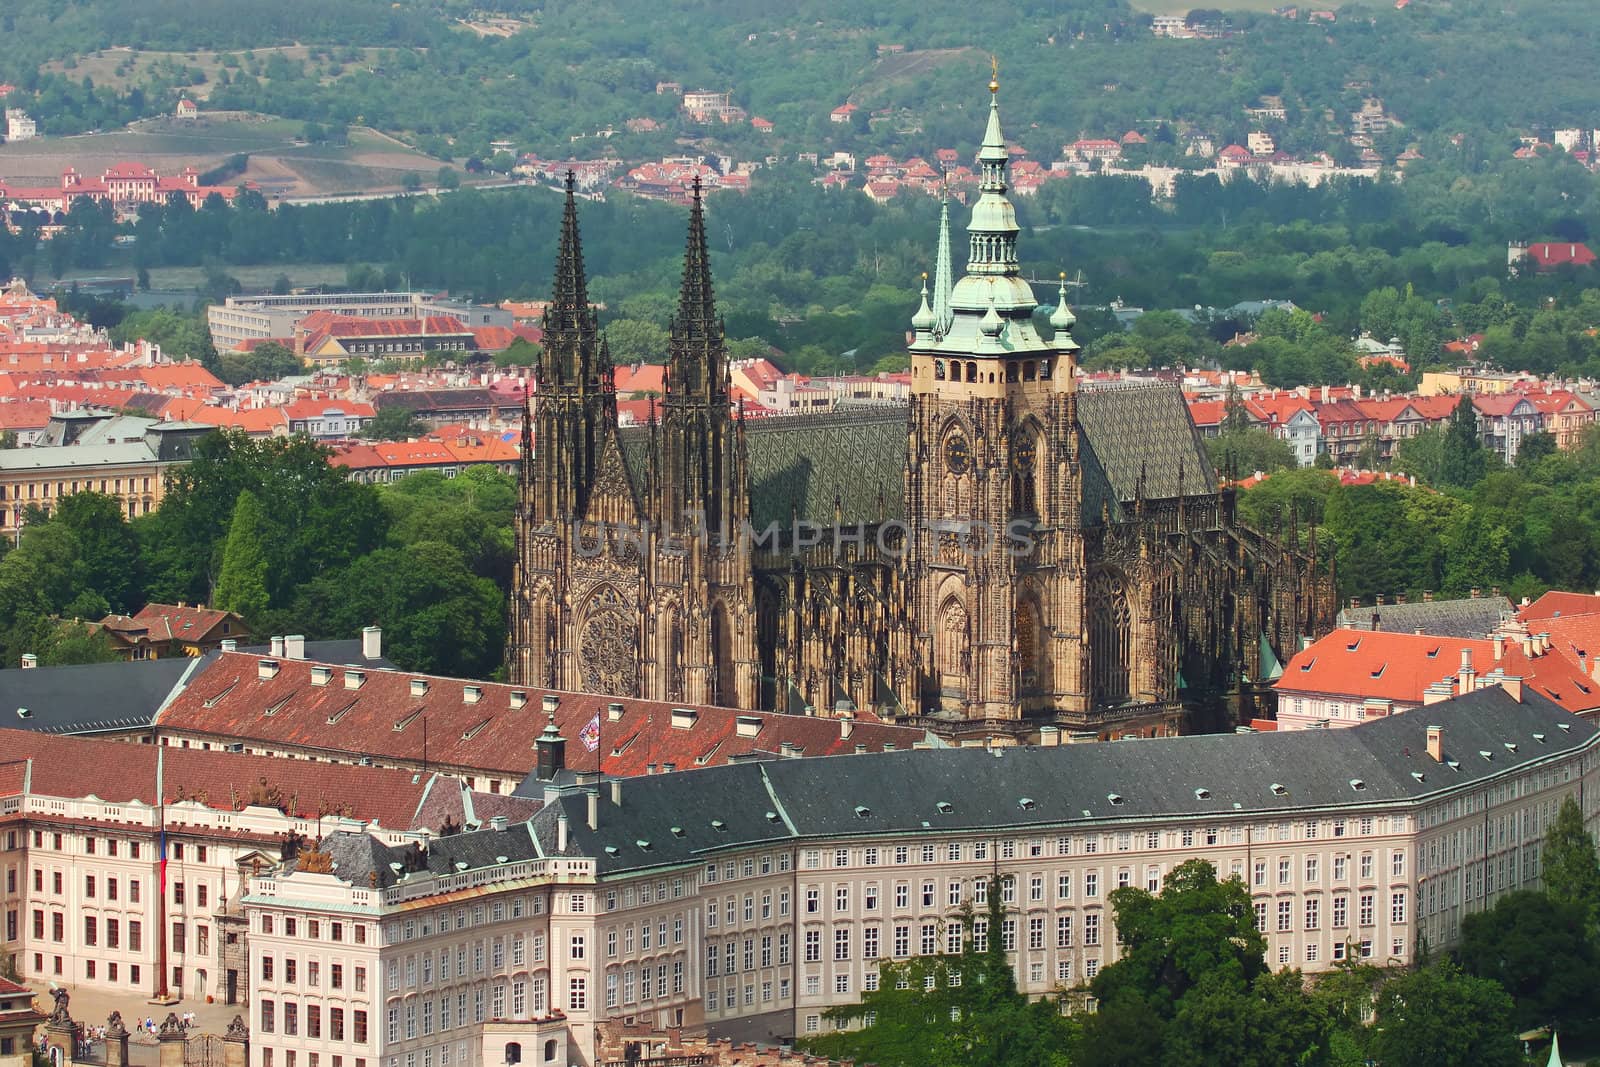 St Vitus, Prague Castle and Hradcany District by LoonChild